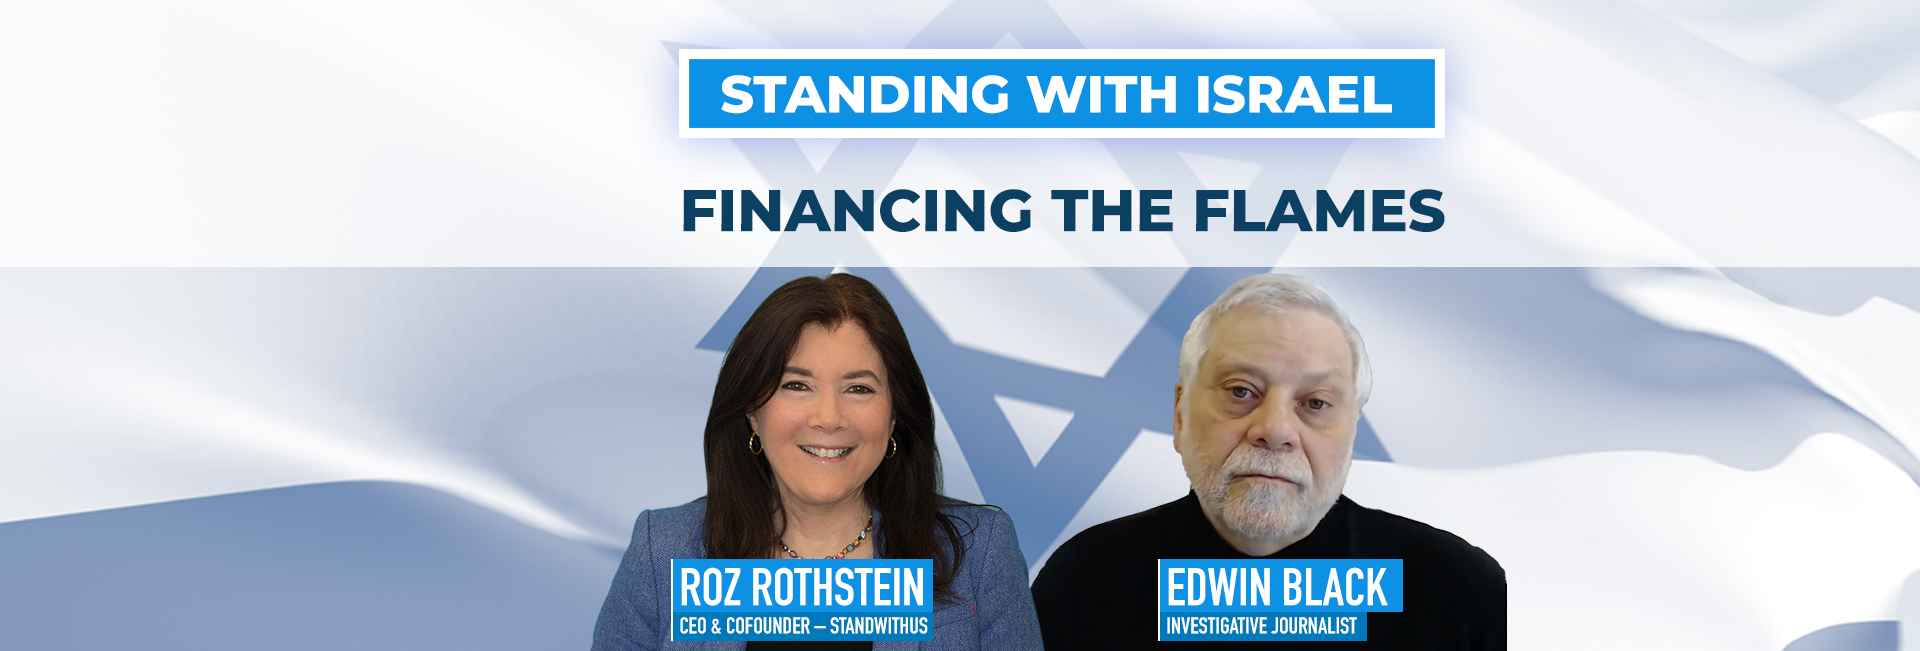 Standing With Israel with Roz Rothstein – Edwin Black: Financing the Flames